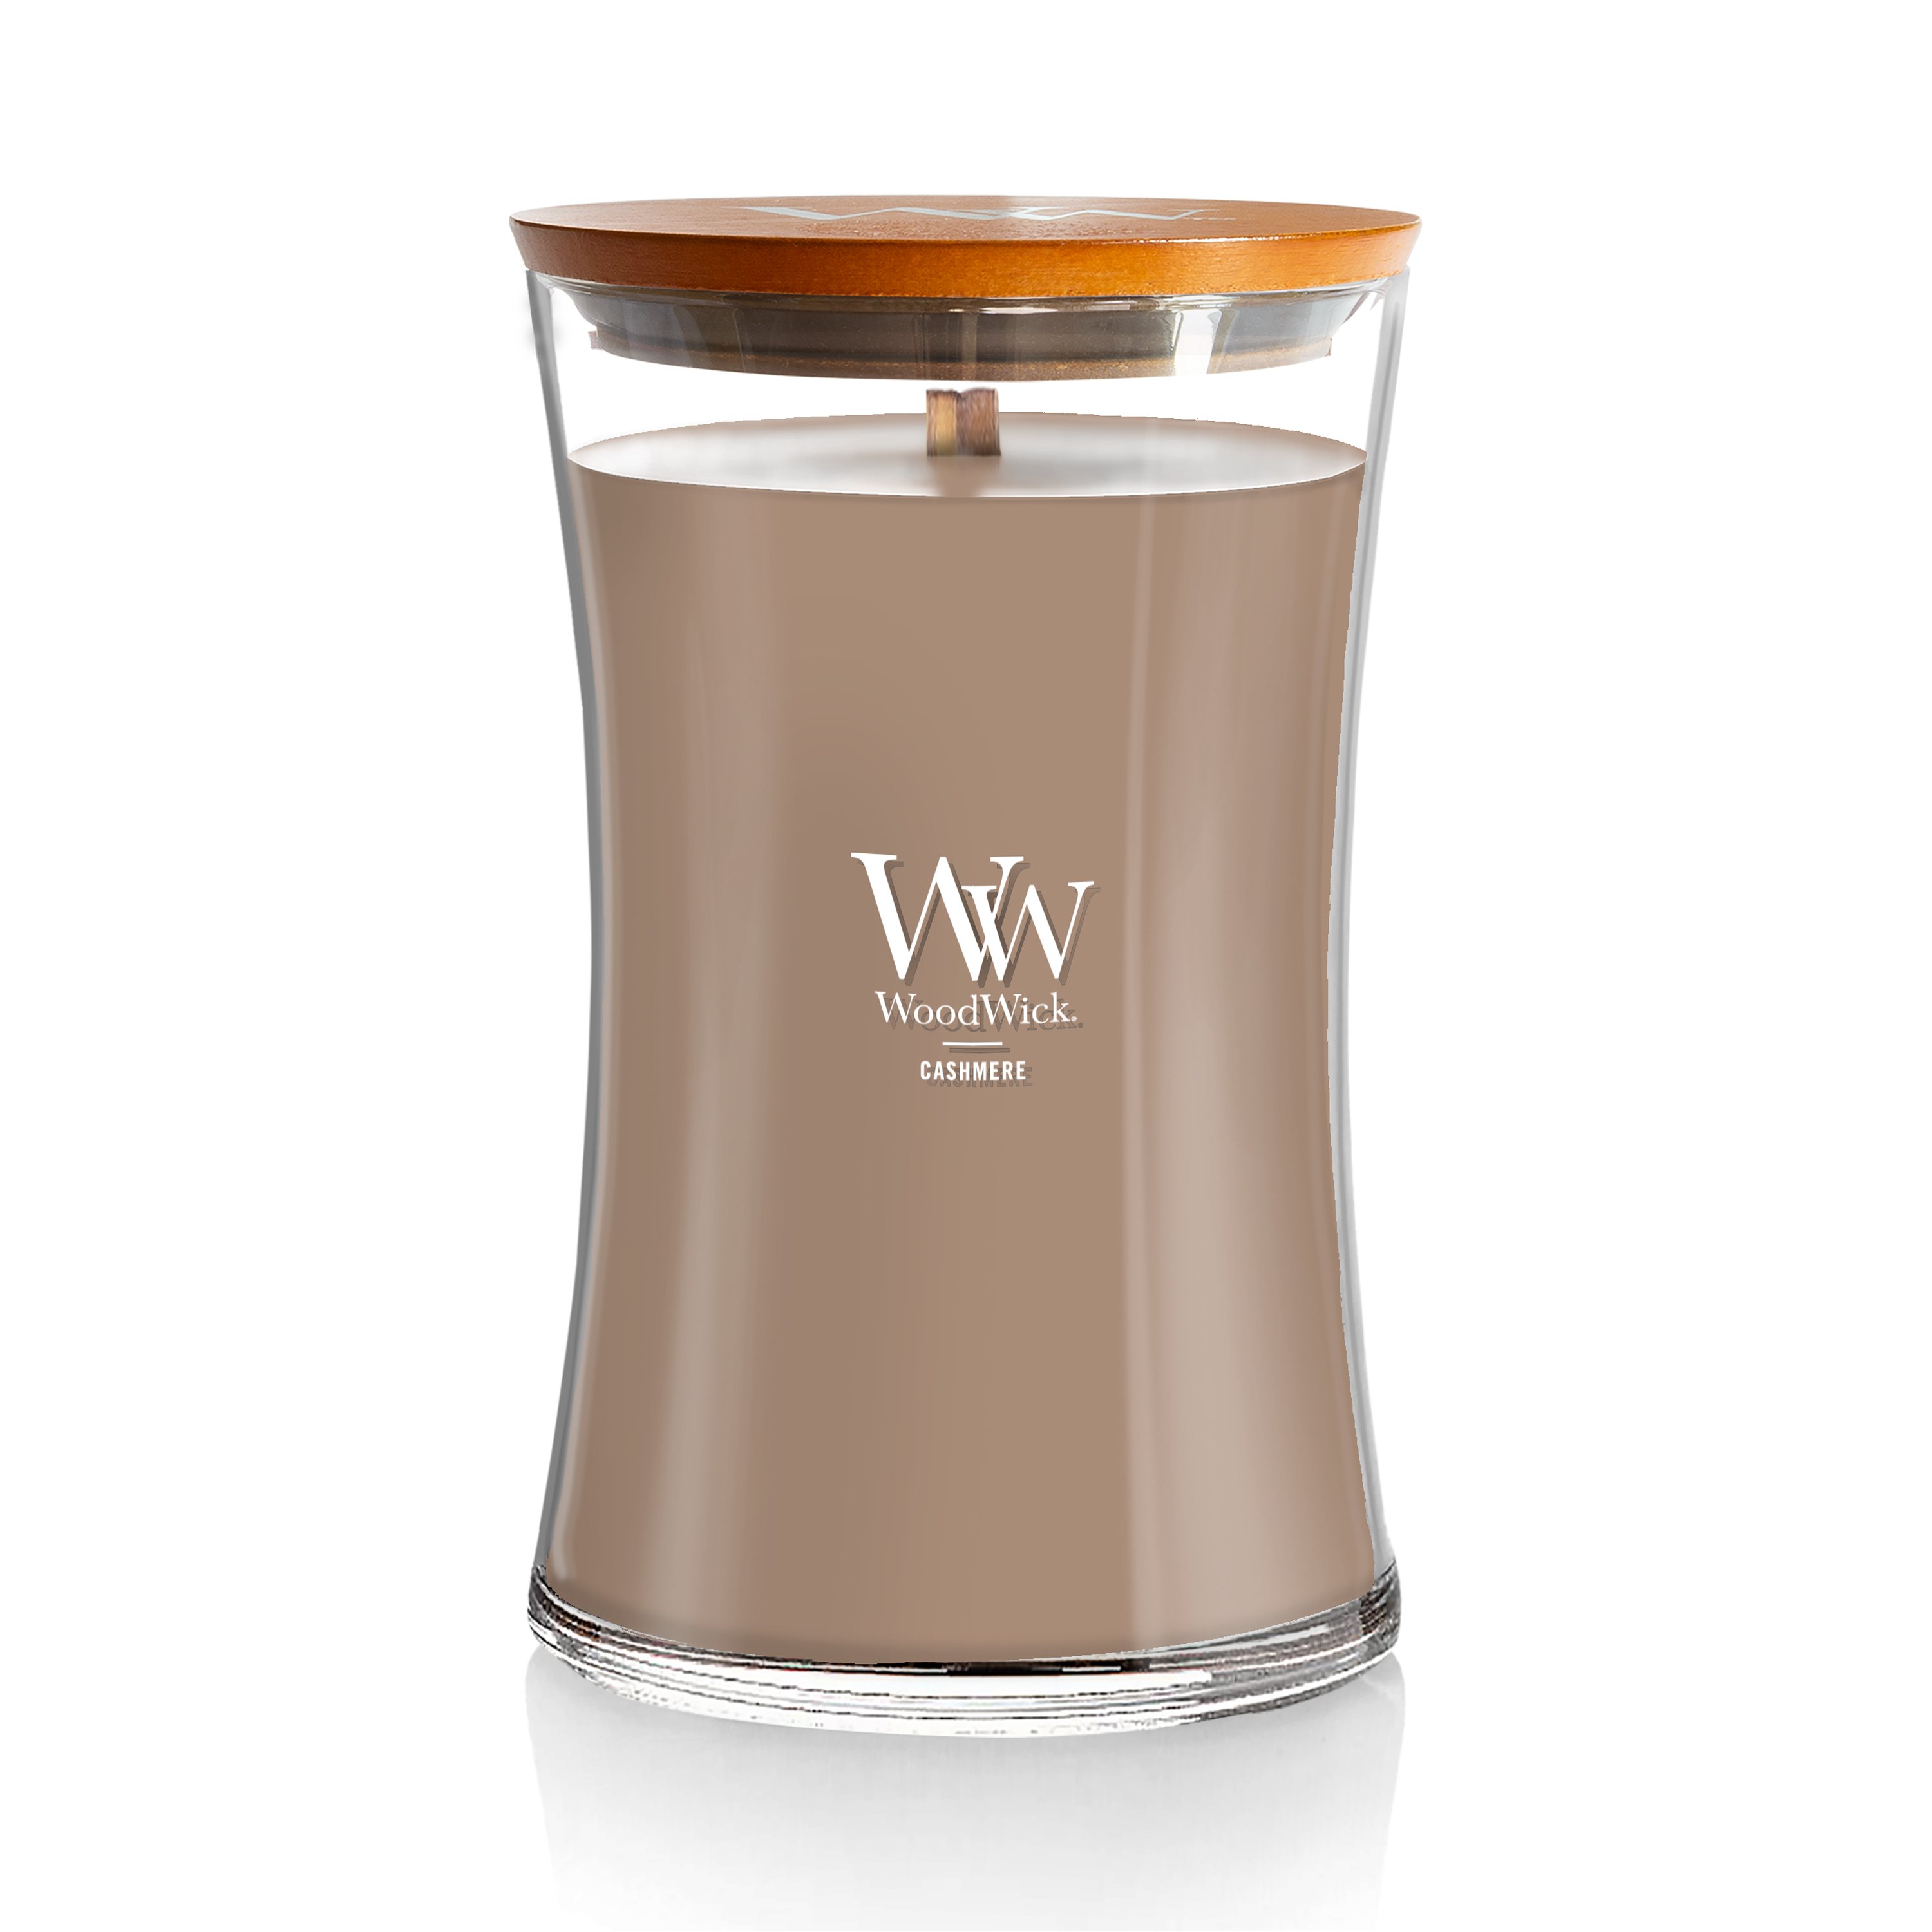 Ww Trilogy Candle, Cashmere - 1 candle, 21.5 oz